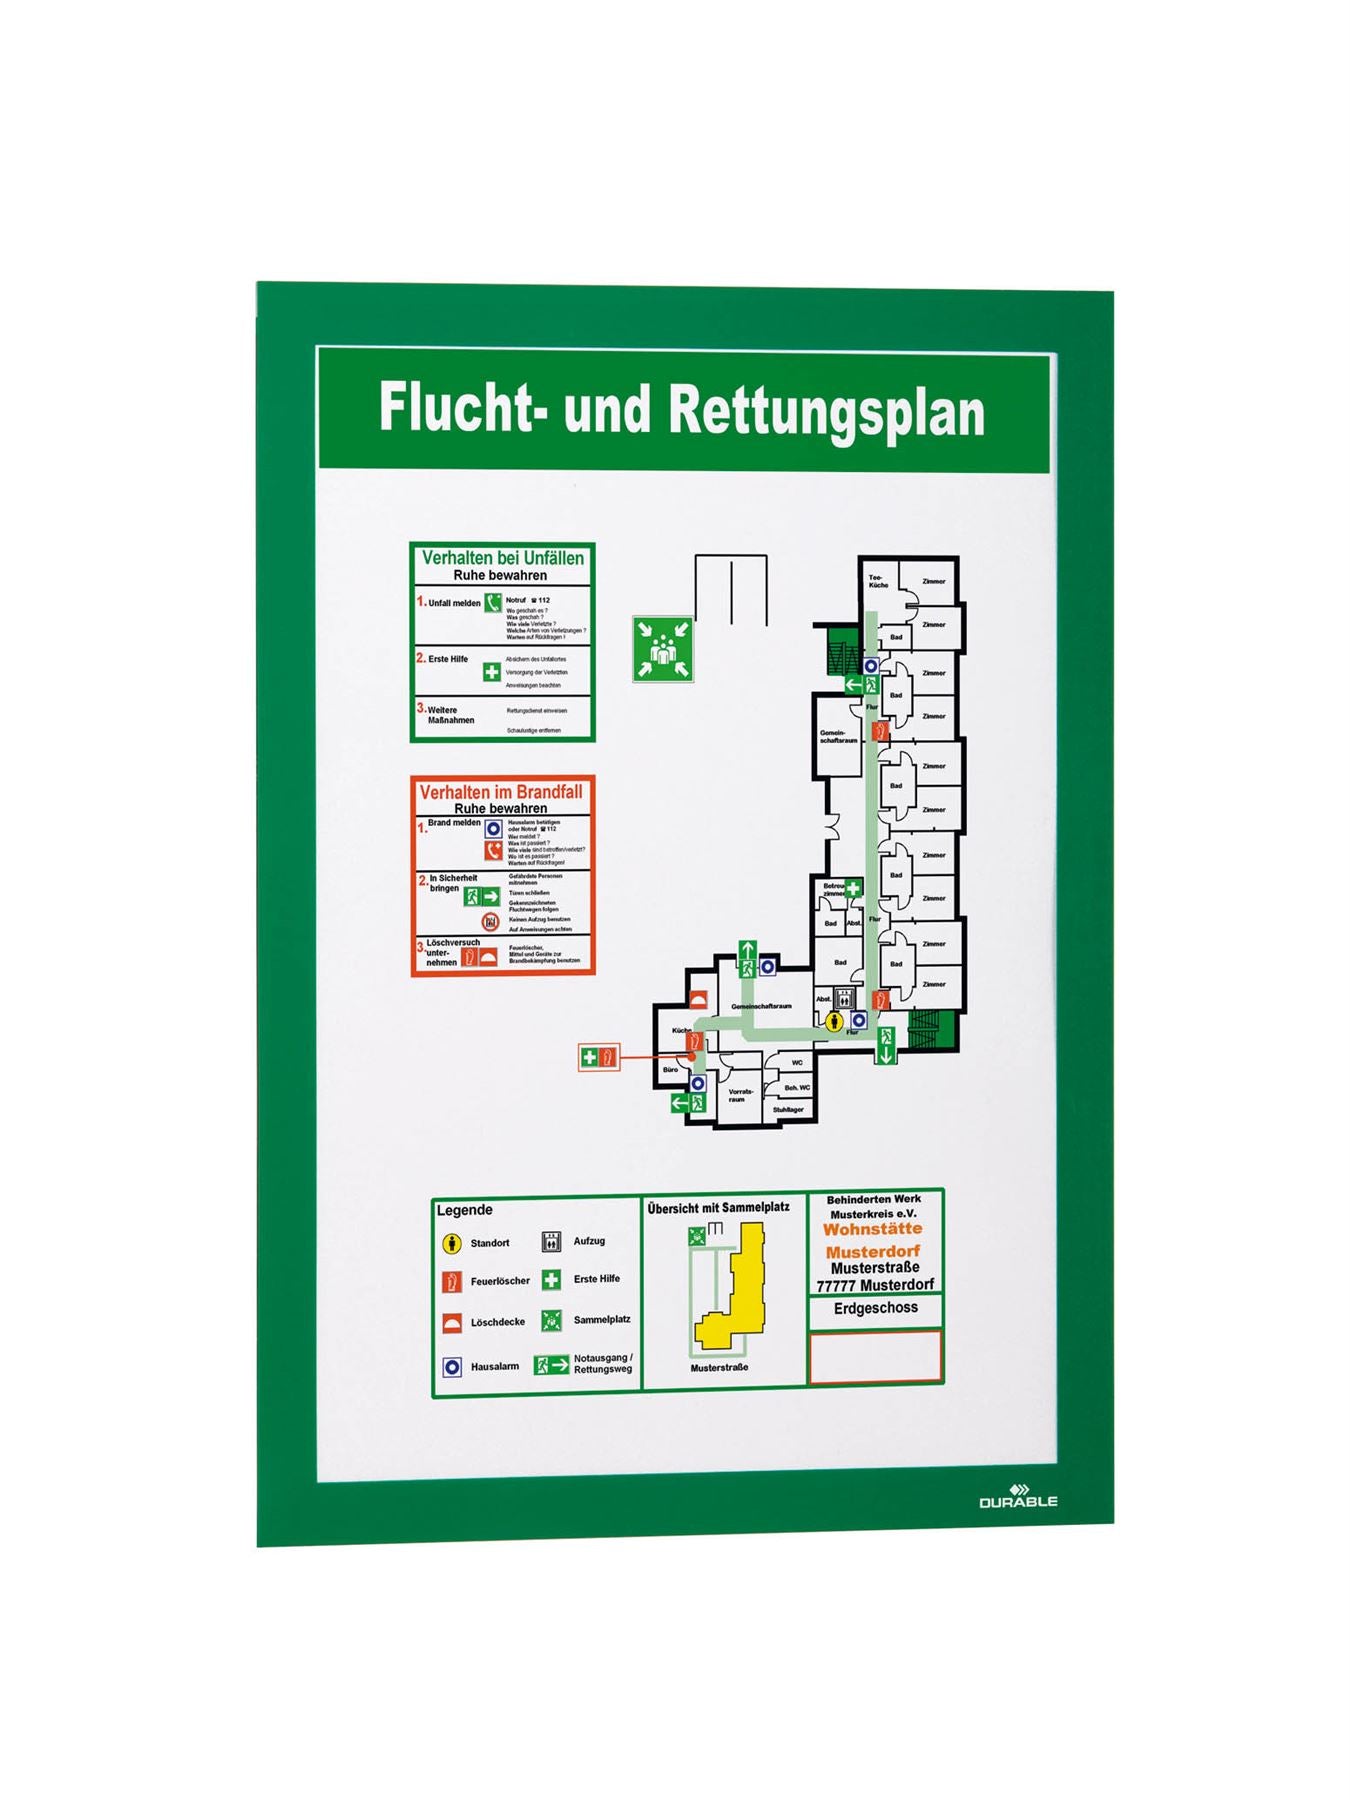 Durable DURAFRAME Self Adhesive Magnetic Signage Frame | 2 Pack | A4 Green